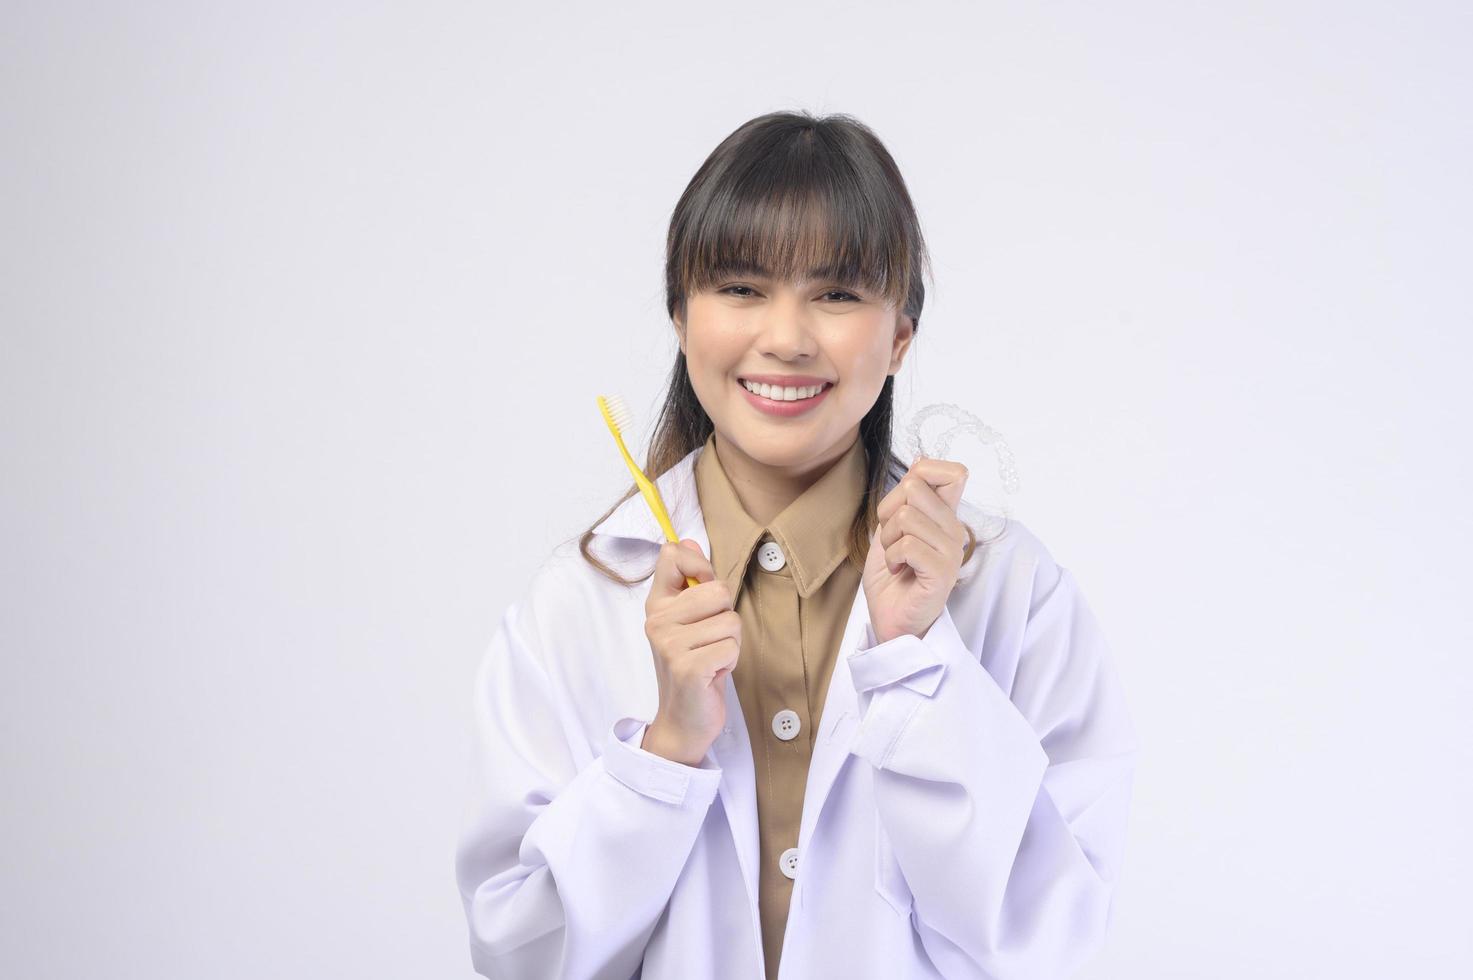 Young female dentist smiling over white background studio photo